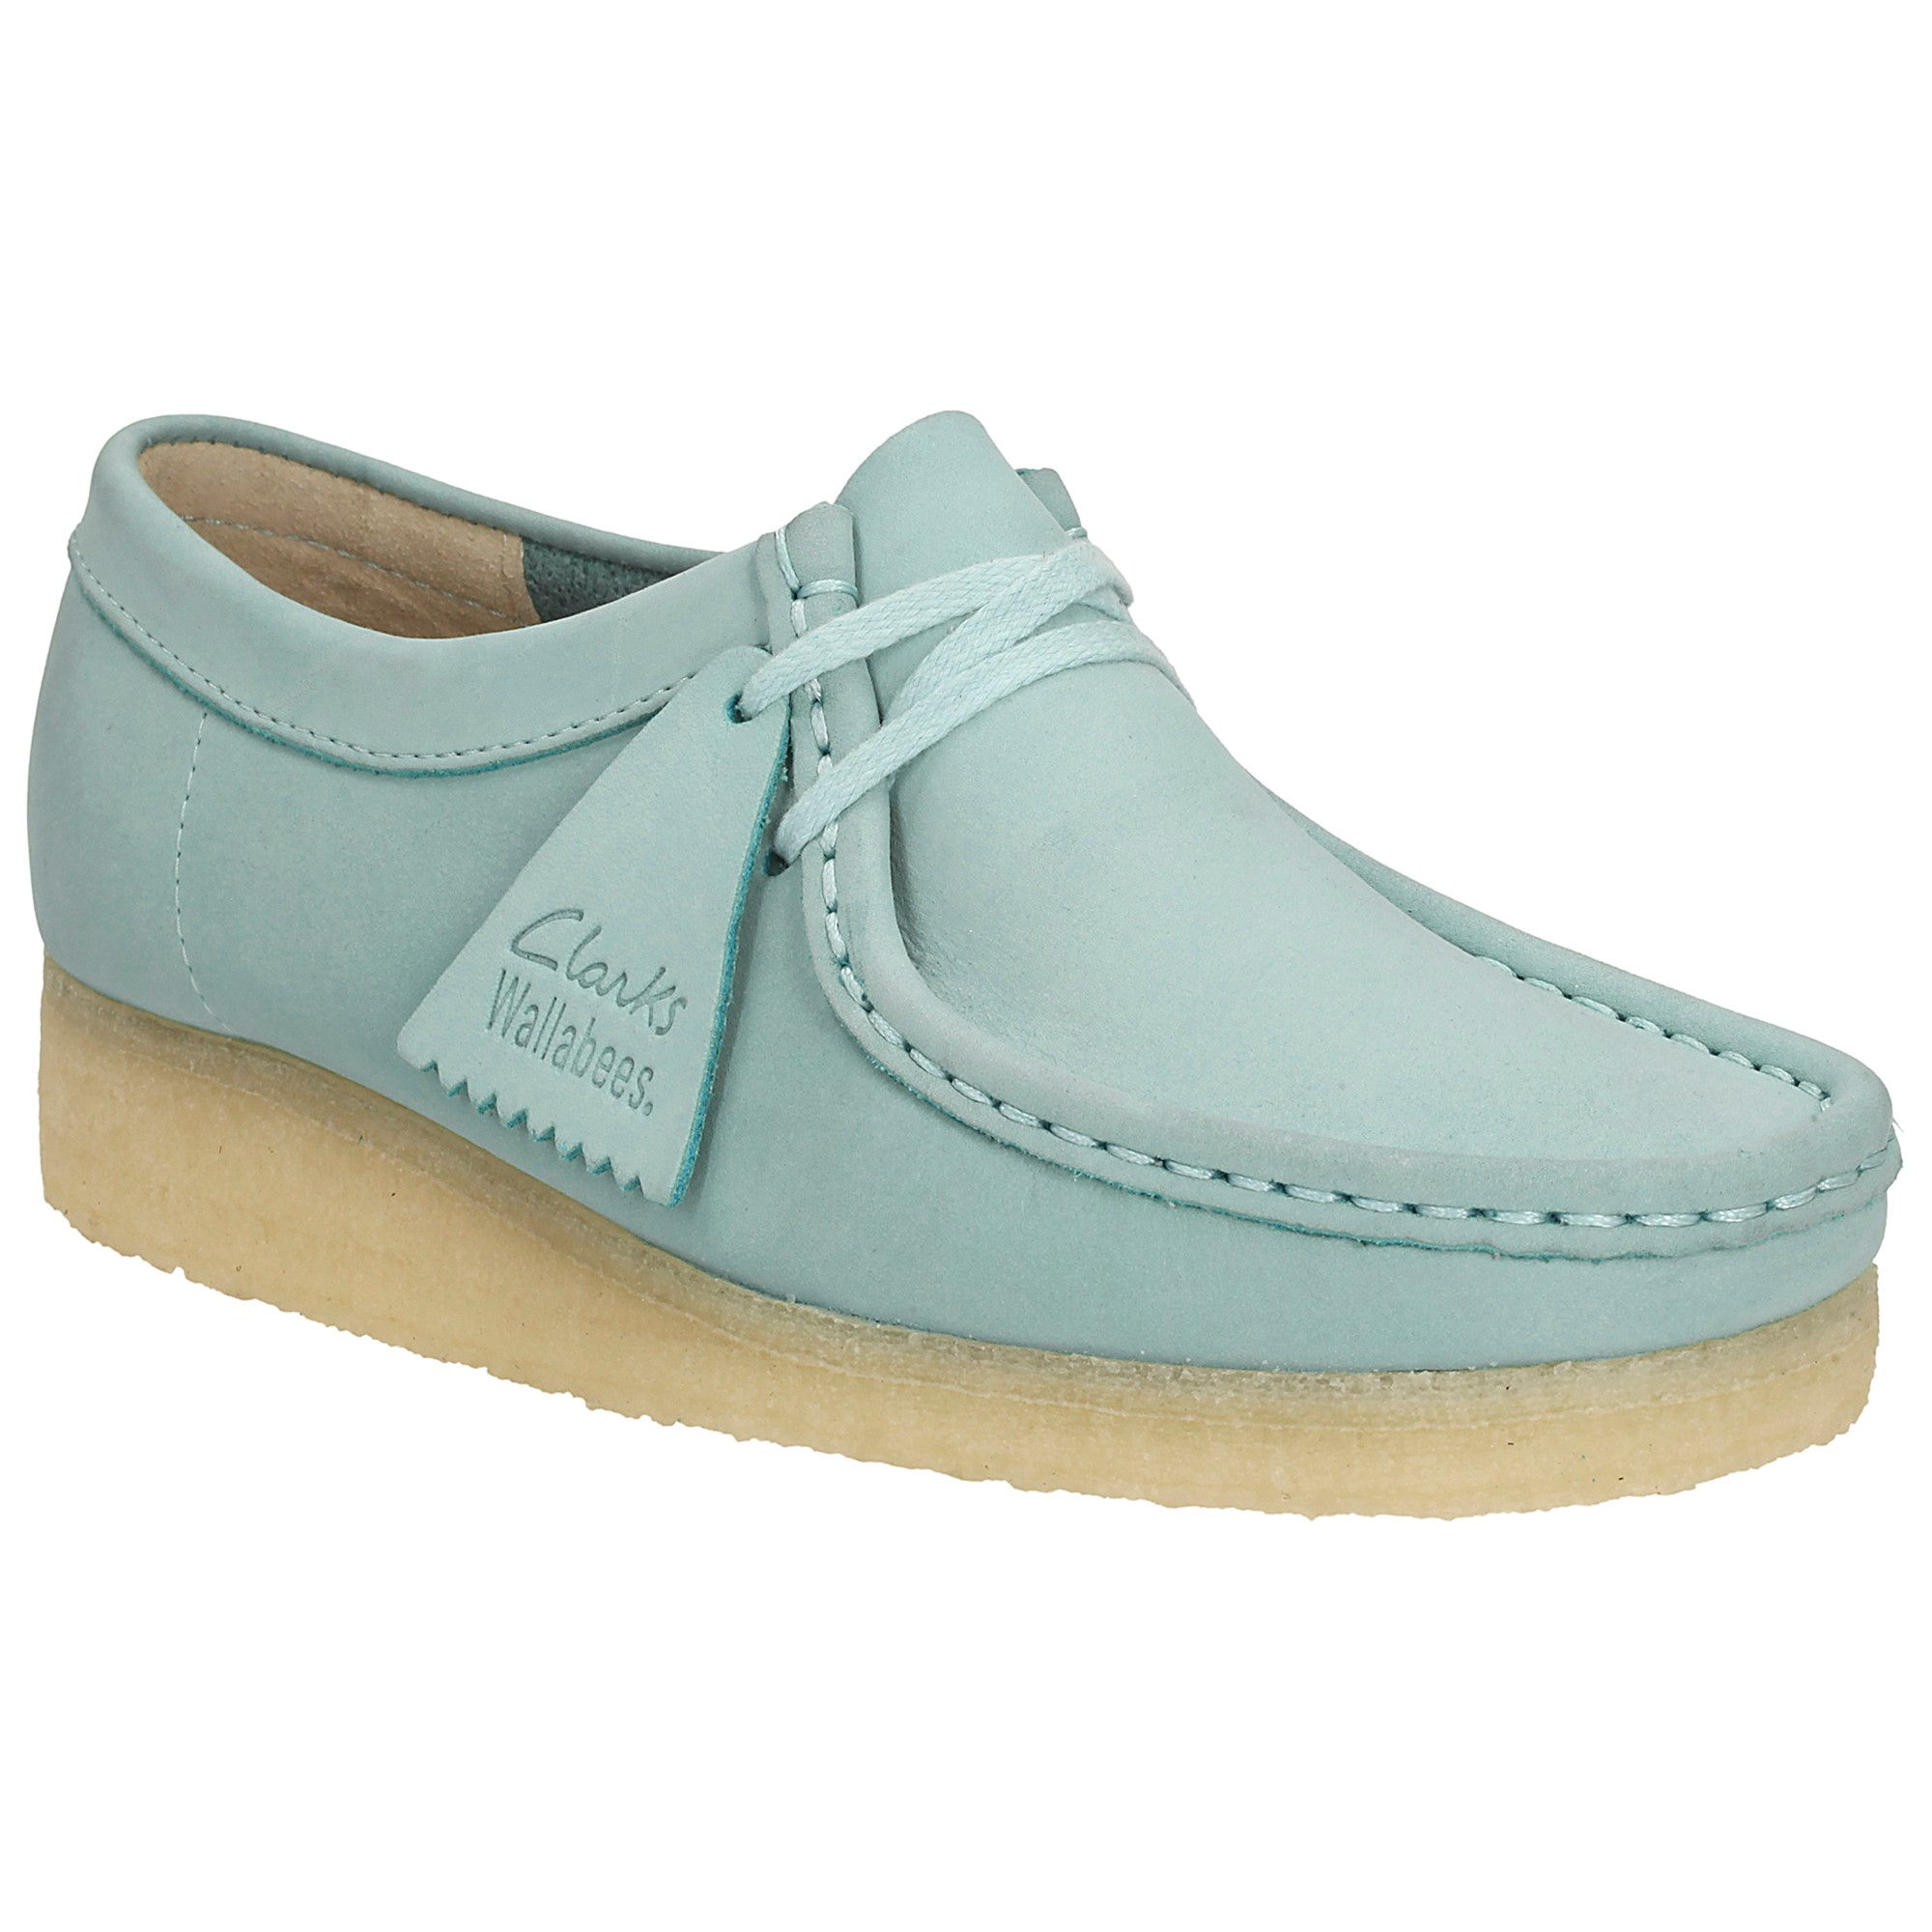 Clarks Originals Wallabee Lace Up Trainers in Light Blue (Blue) - Lyst